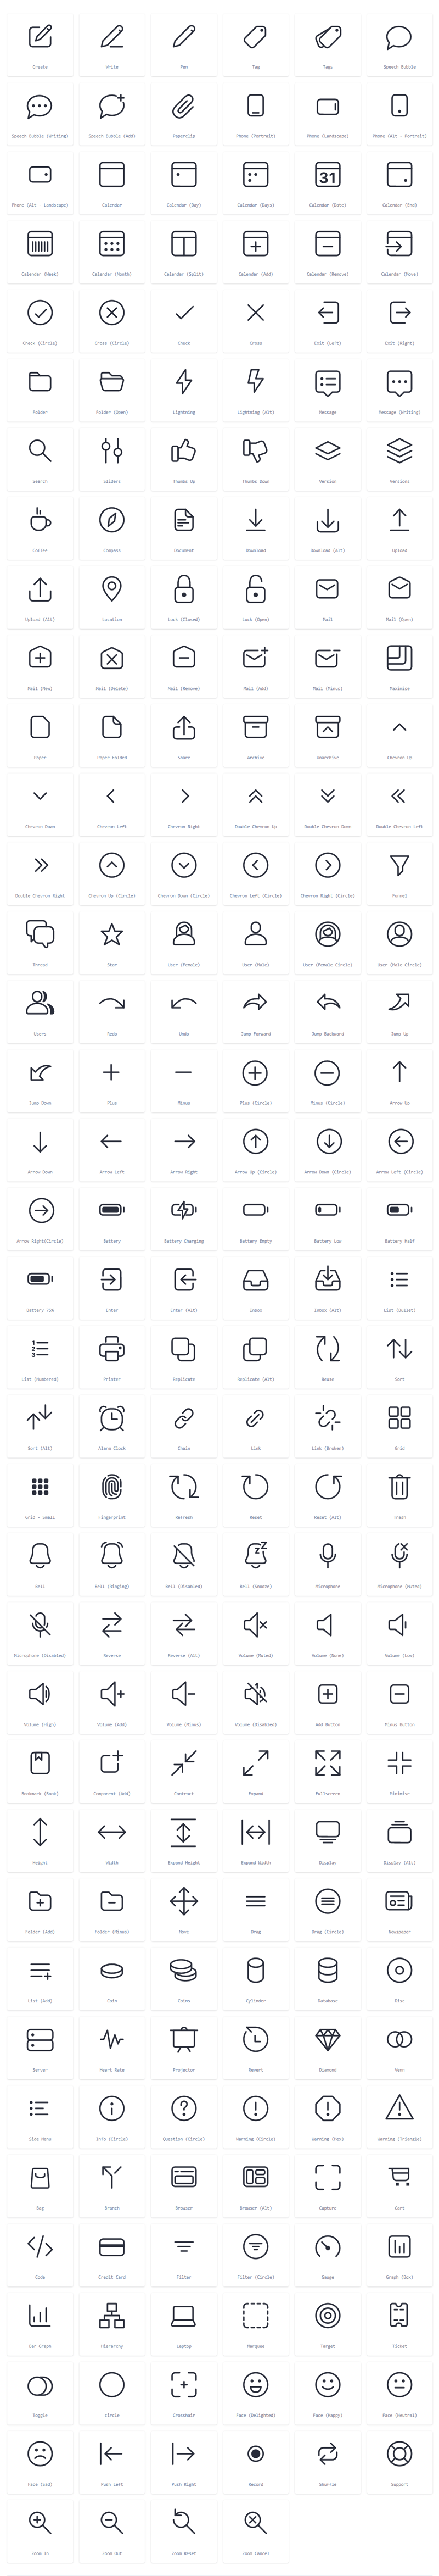 Open source Loading GIF Icons Vol-1 on Behance